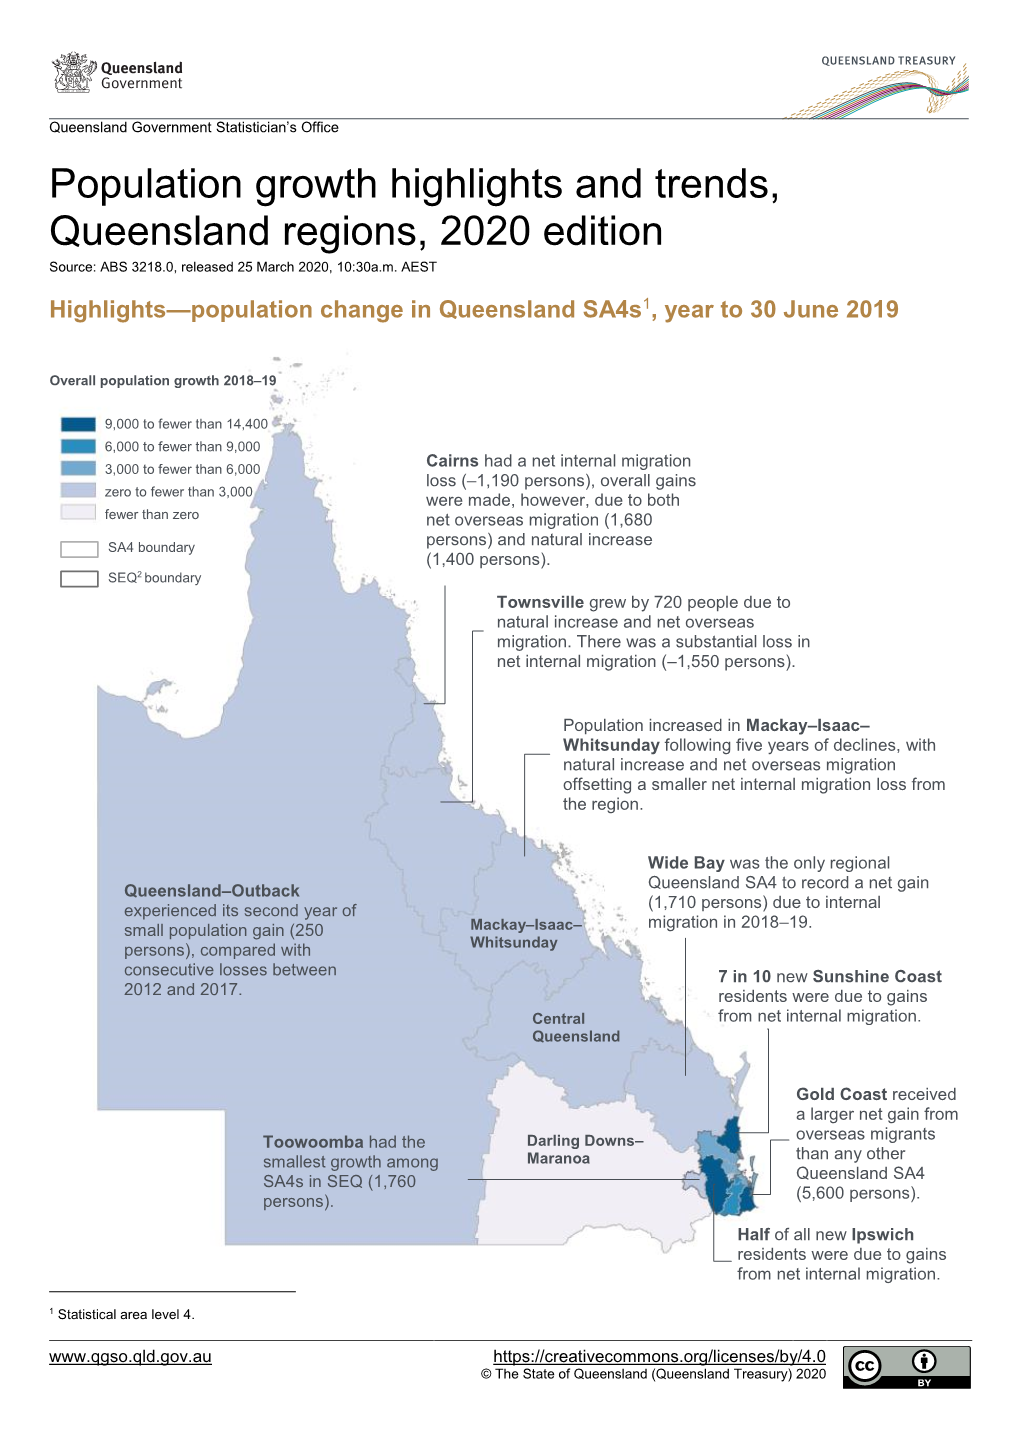 Population Growth Highlights and Trends, Queensland Regions, 2020 Edition Source: ABS 3218.0, Released 25 March 2020, 10:30A.M